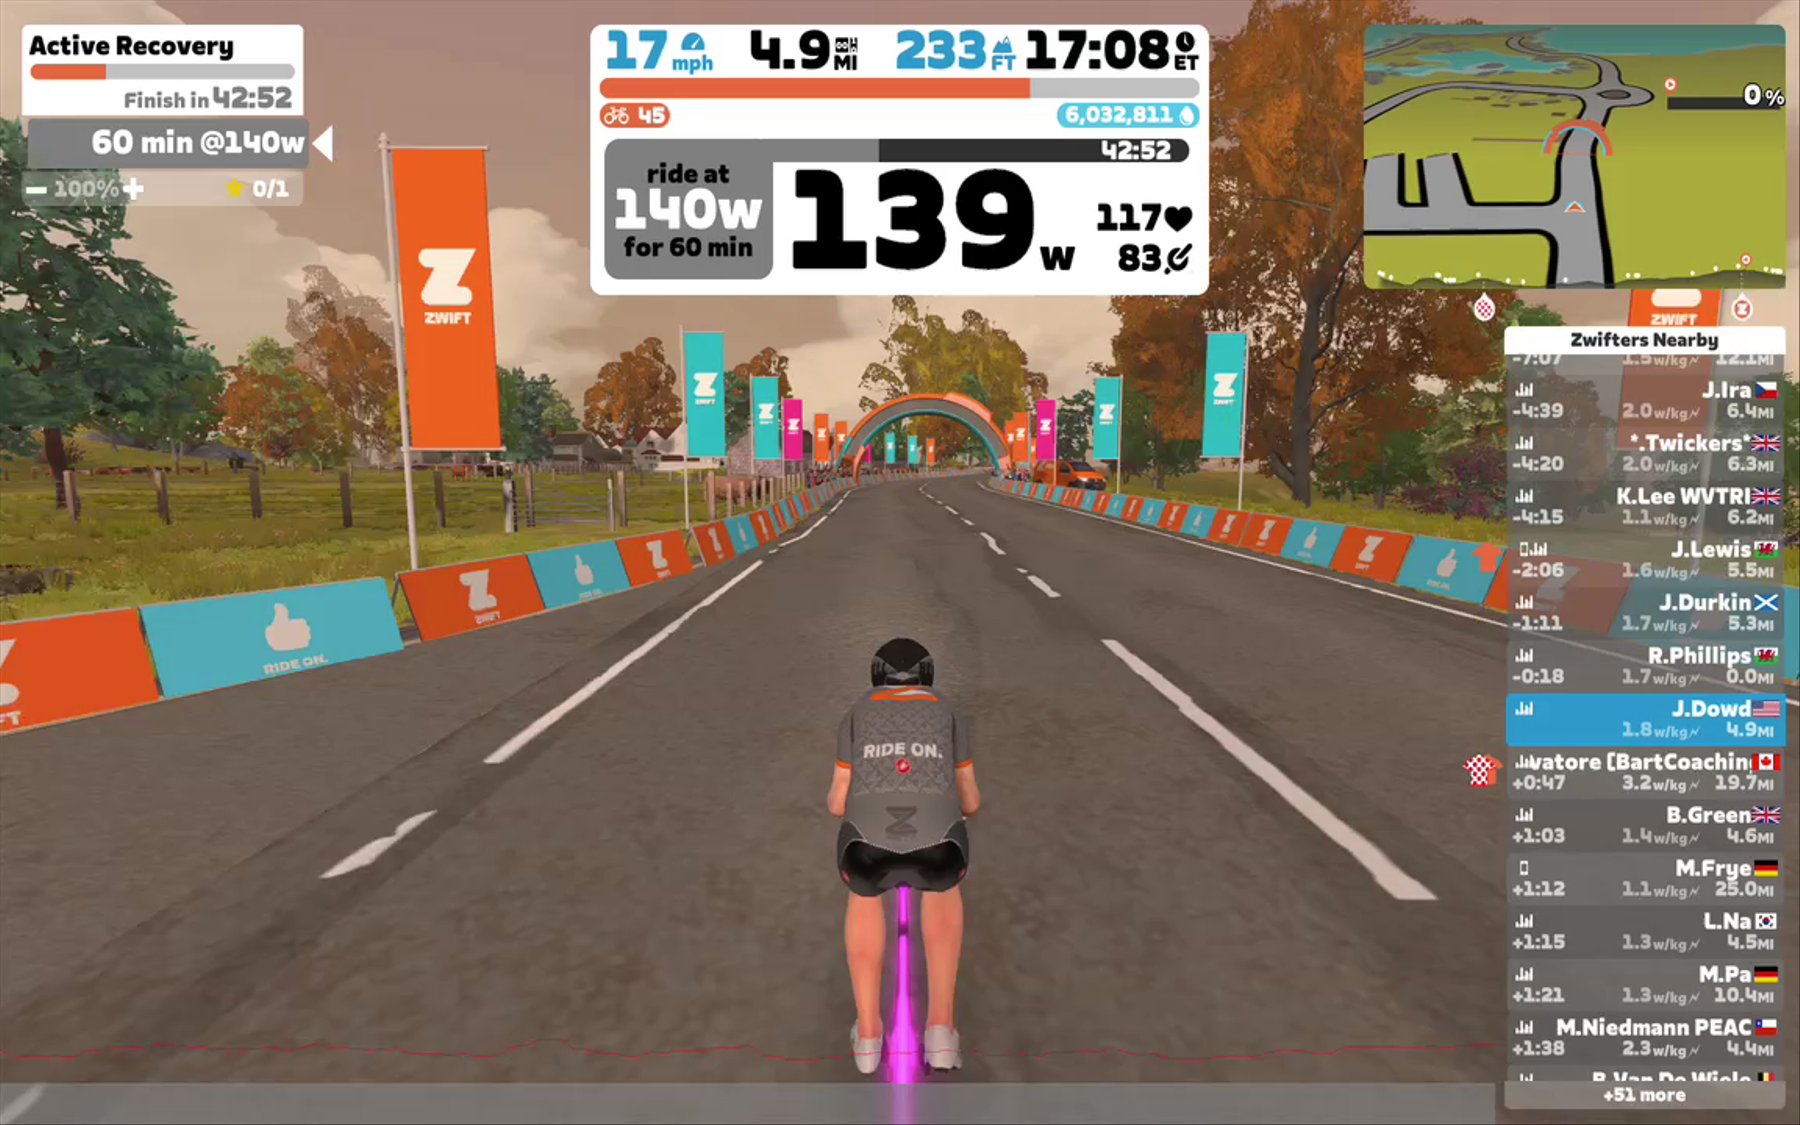 Zwift - Active Recovery in Scotland